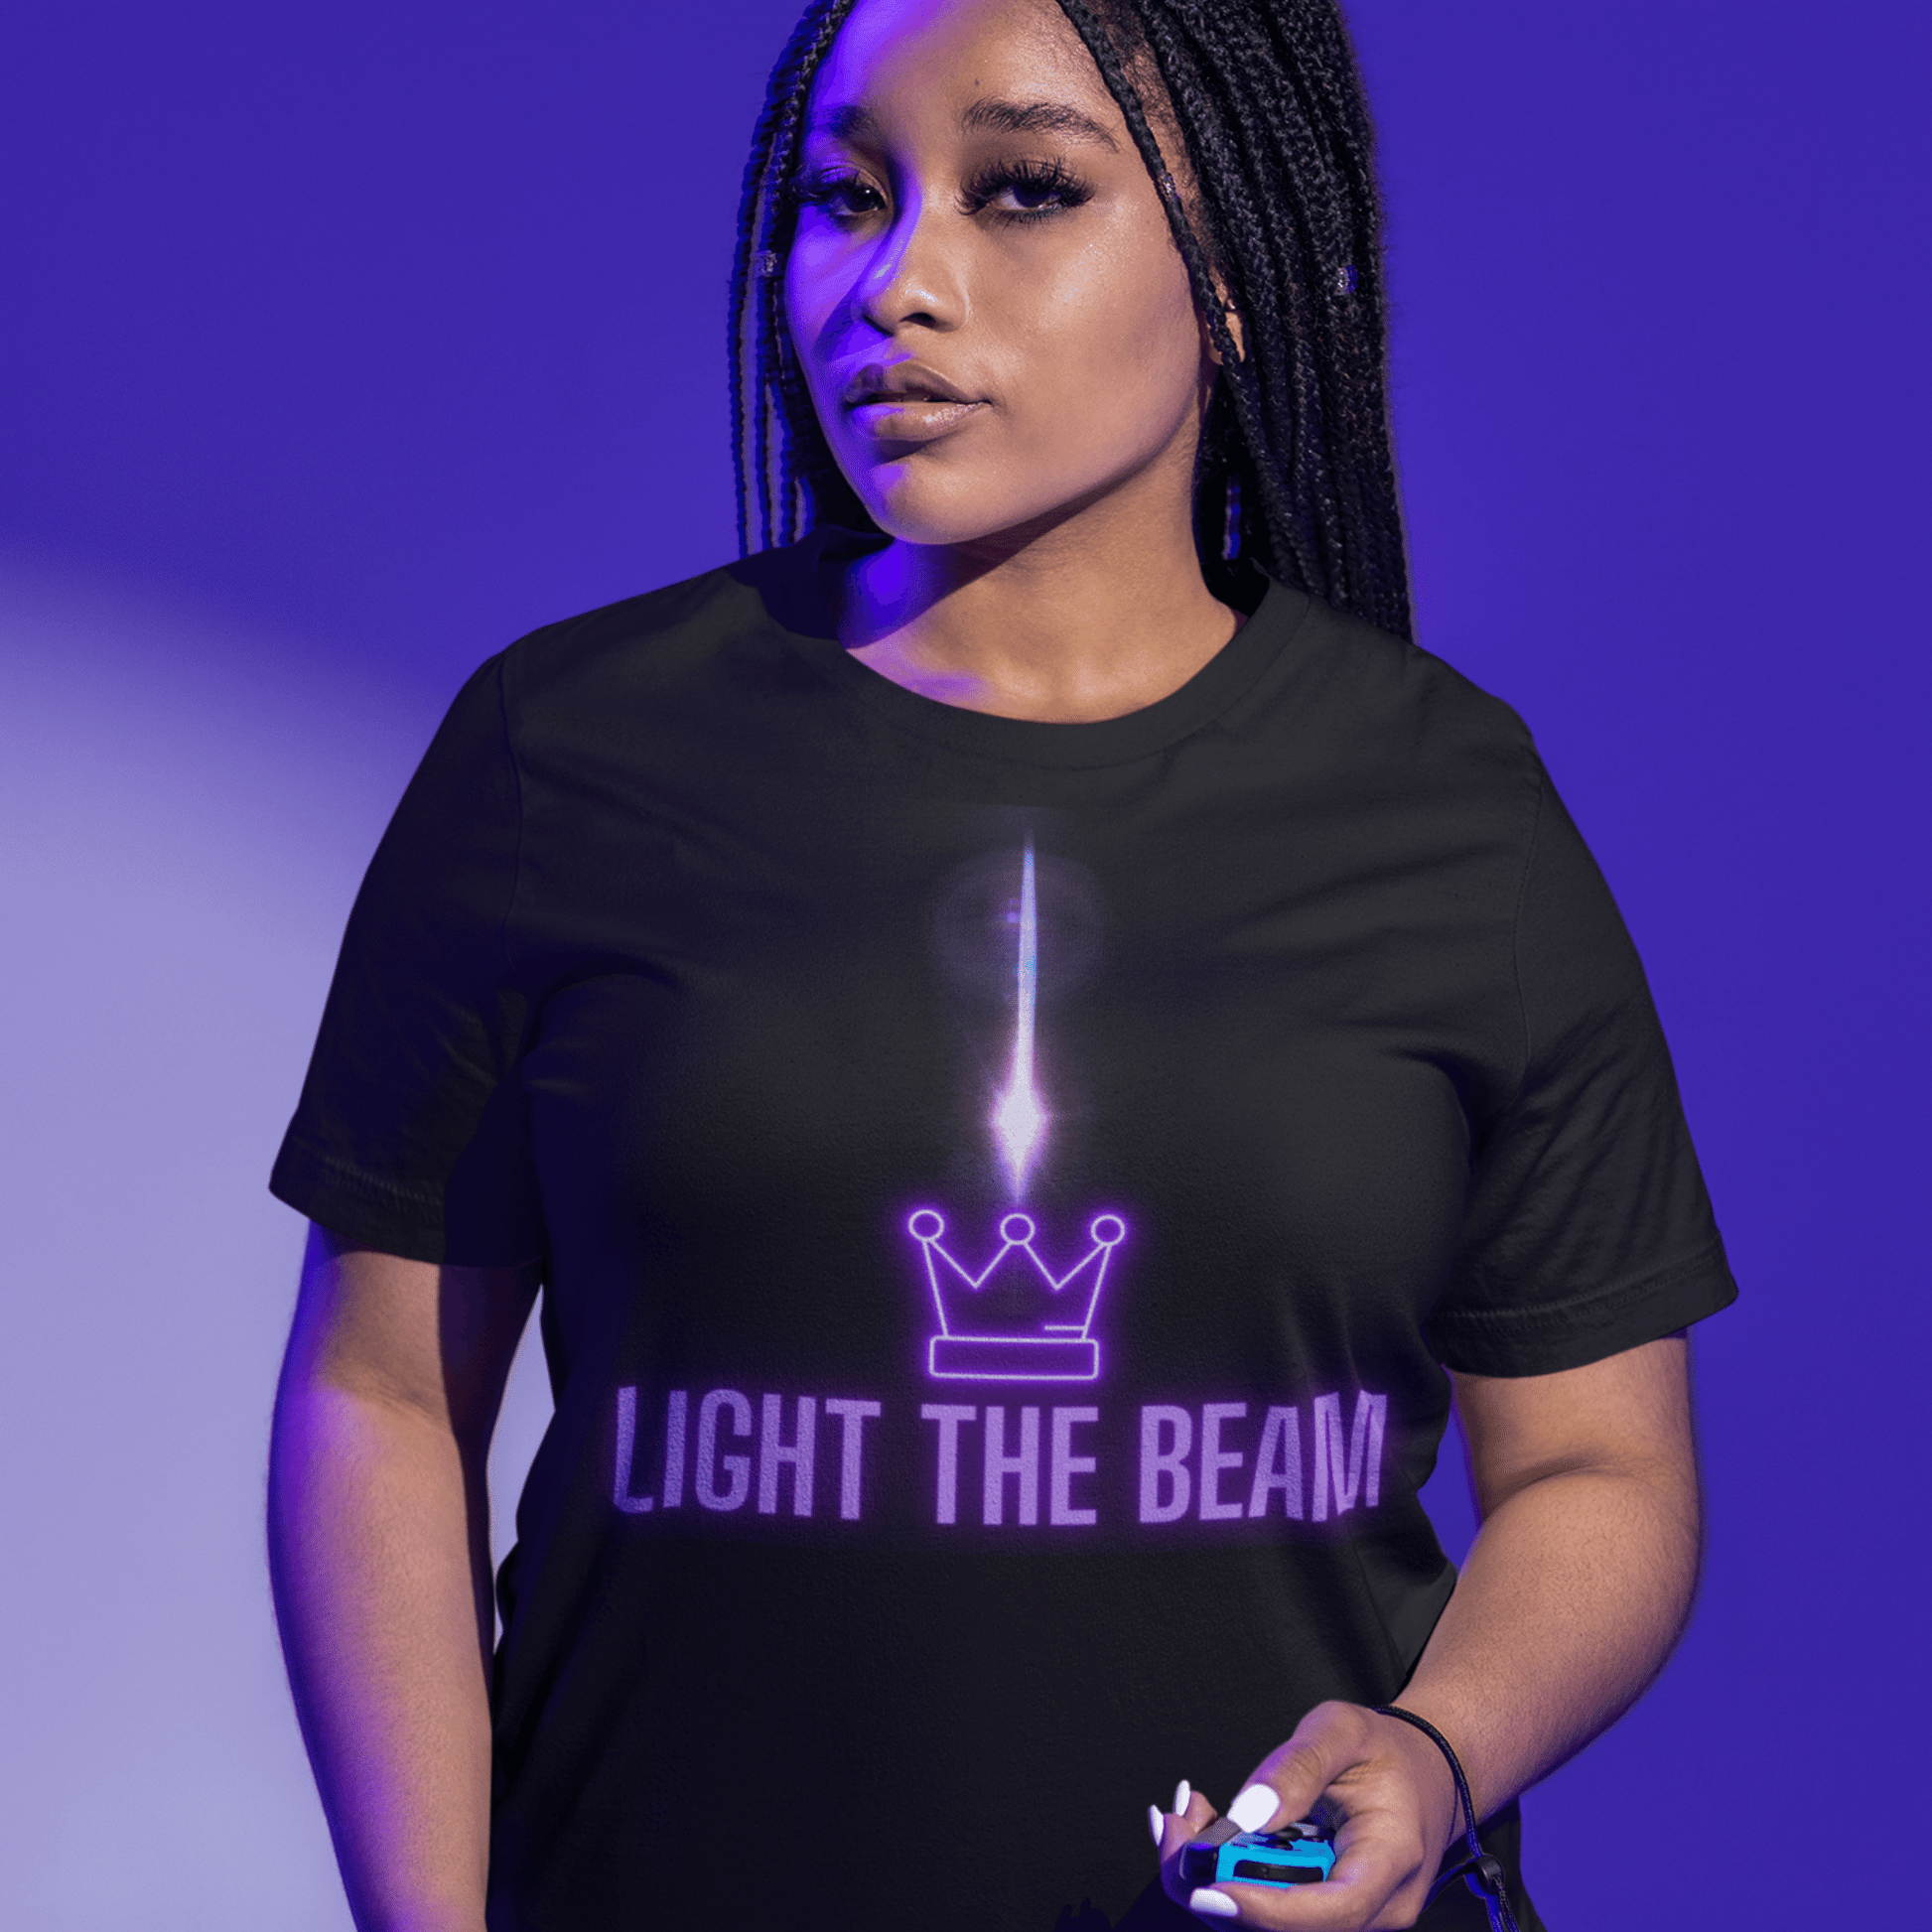 Light the Beam, Sacramento Basketball, Unisex Short Sleeve Tee, Kings Basketball,Light the Beam! This Kings Basketball T-shirt is the perfect way to celebrate another W - WIN - for your Sacramento Basketball team in this comfortable, cool shirt. Perfect to sport at the game or show-off the day after another W. It's going to be an epic season for our Kings team - show off your Sac-Town pride. 